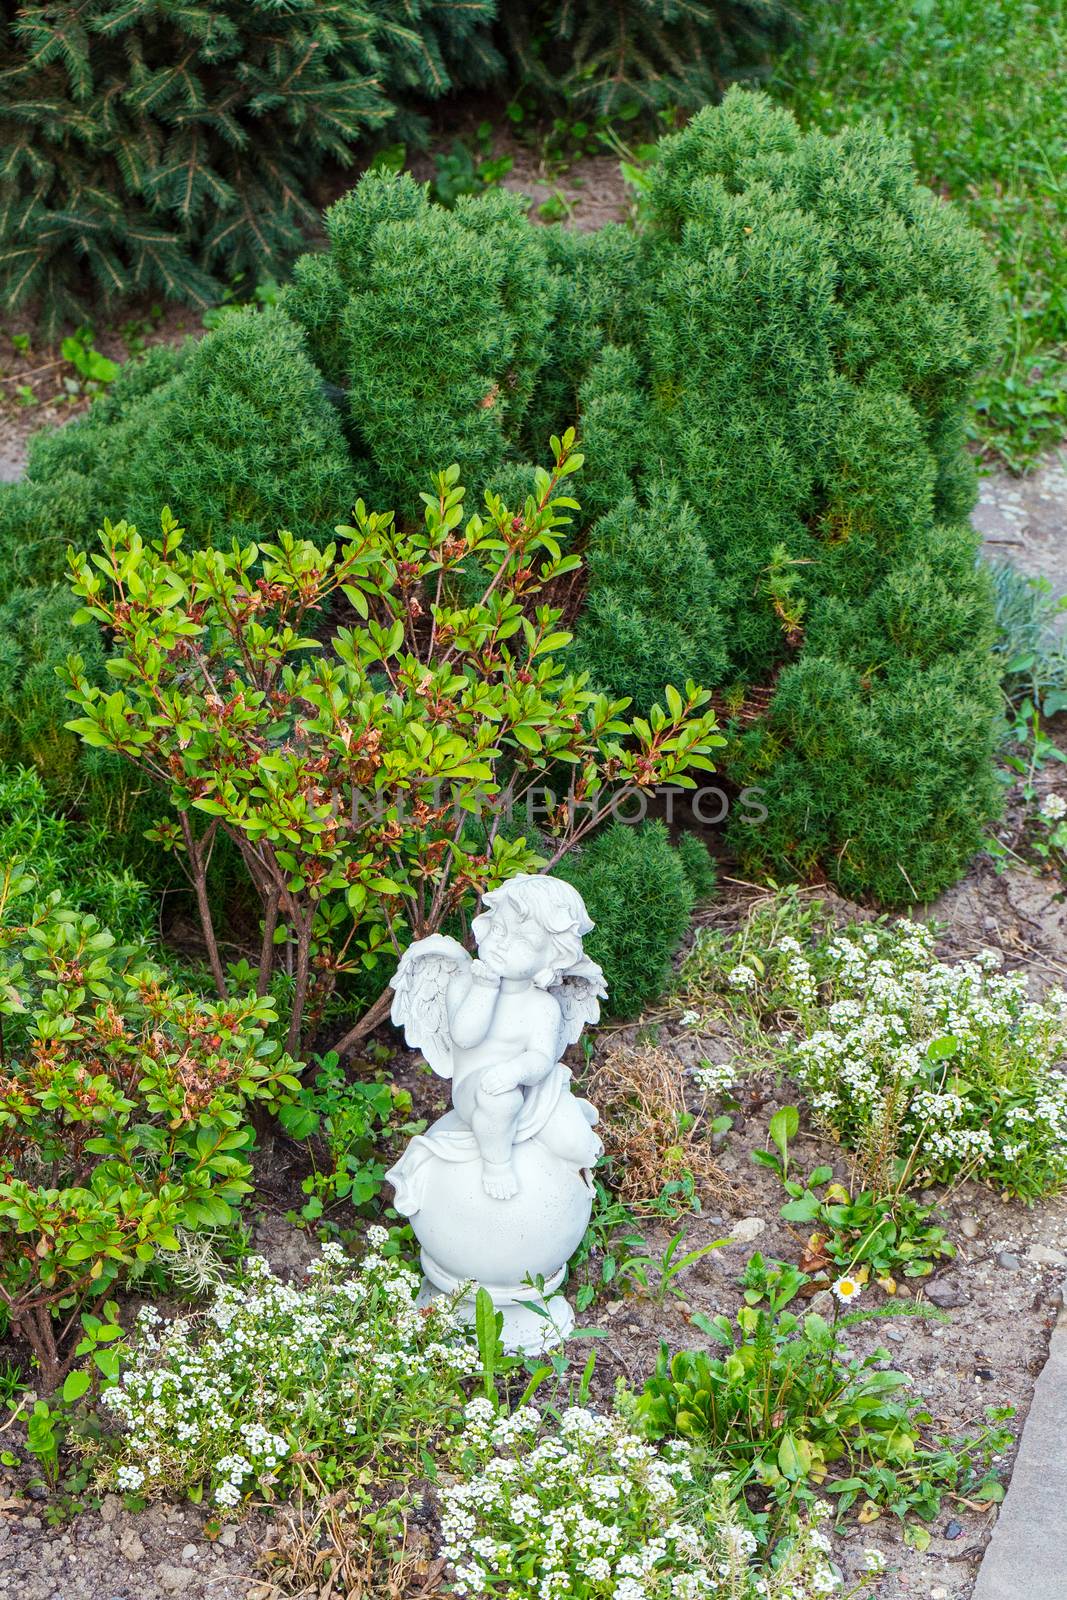 Sculpture of a small angel with a chin resting in the park near green bushes and flowers. by Adamchuk